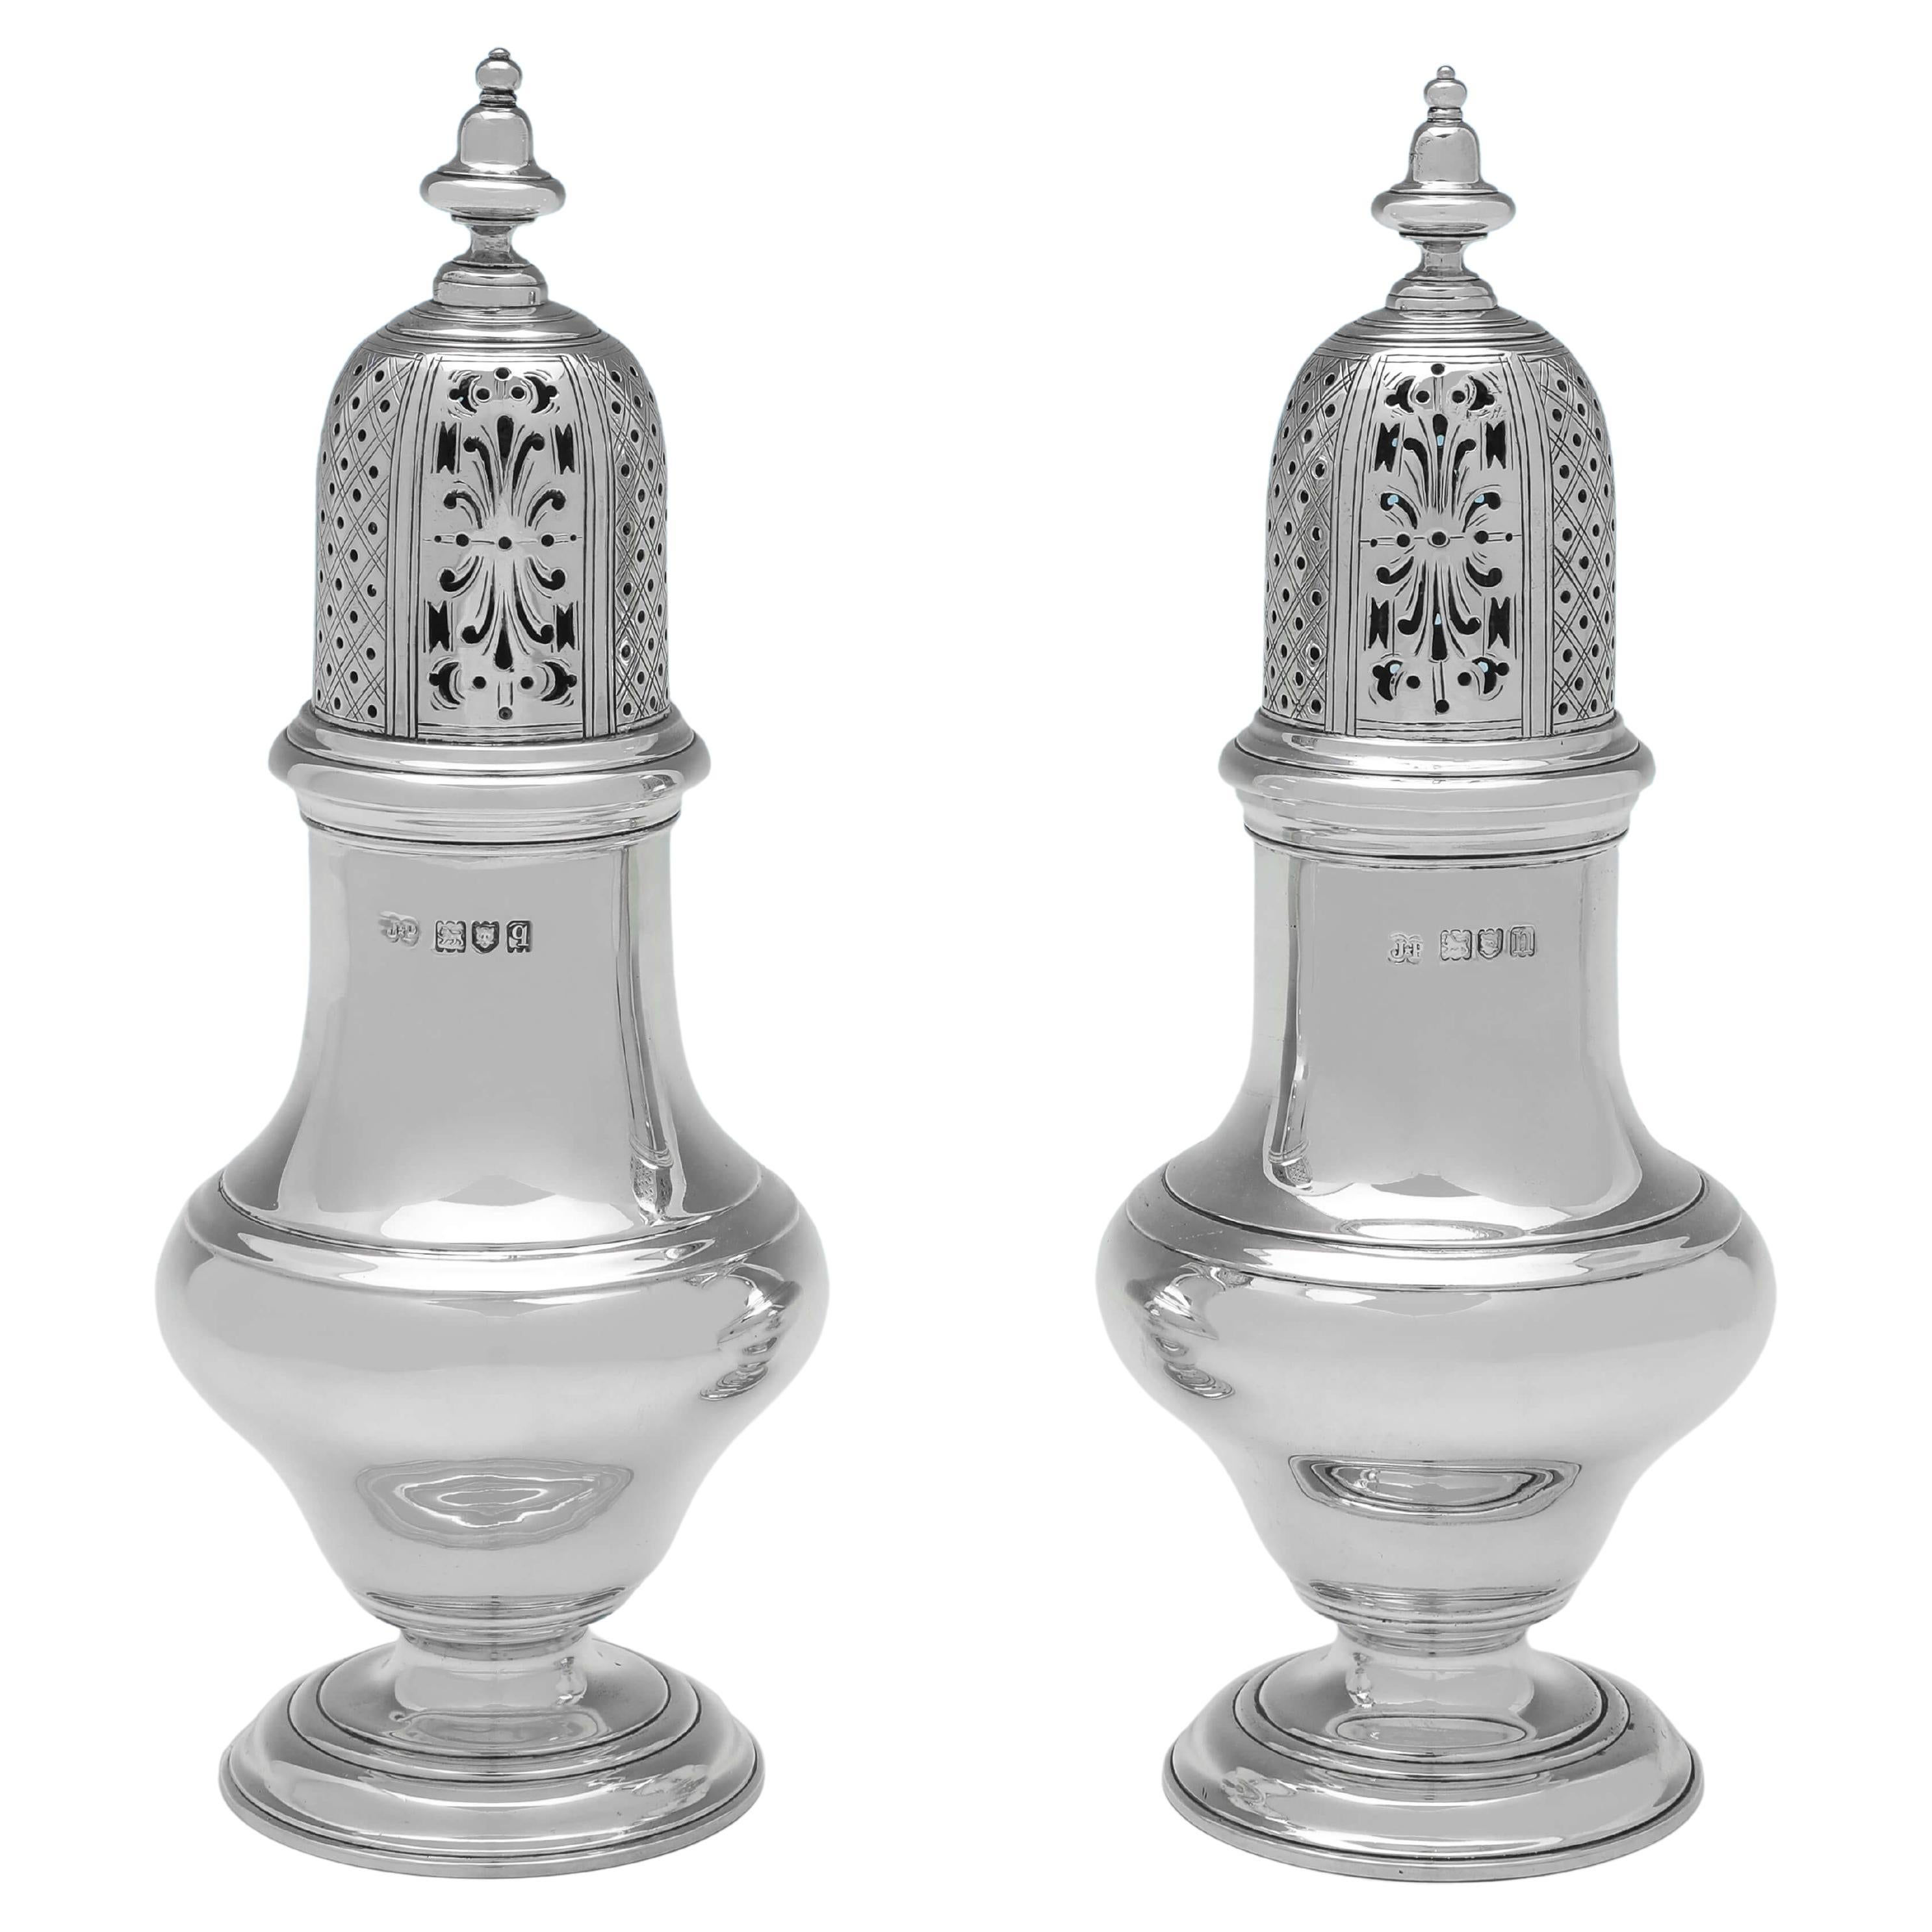 Pair of Antique Sterling Silver Sugar Casters, 1908 & 1911 by J. Parkes & Co. For Sale